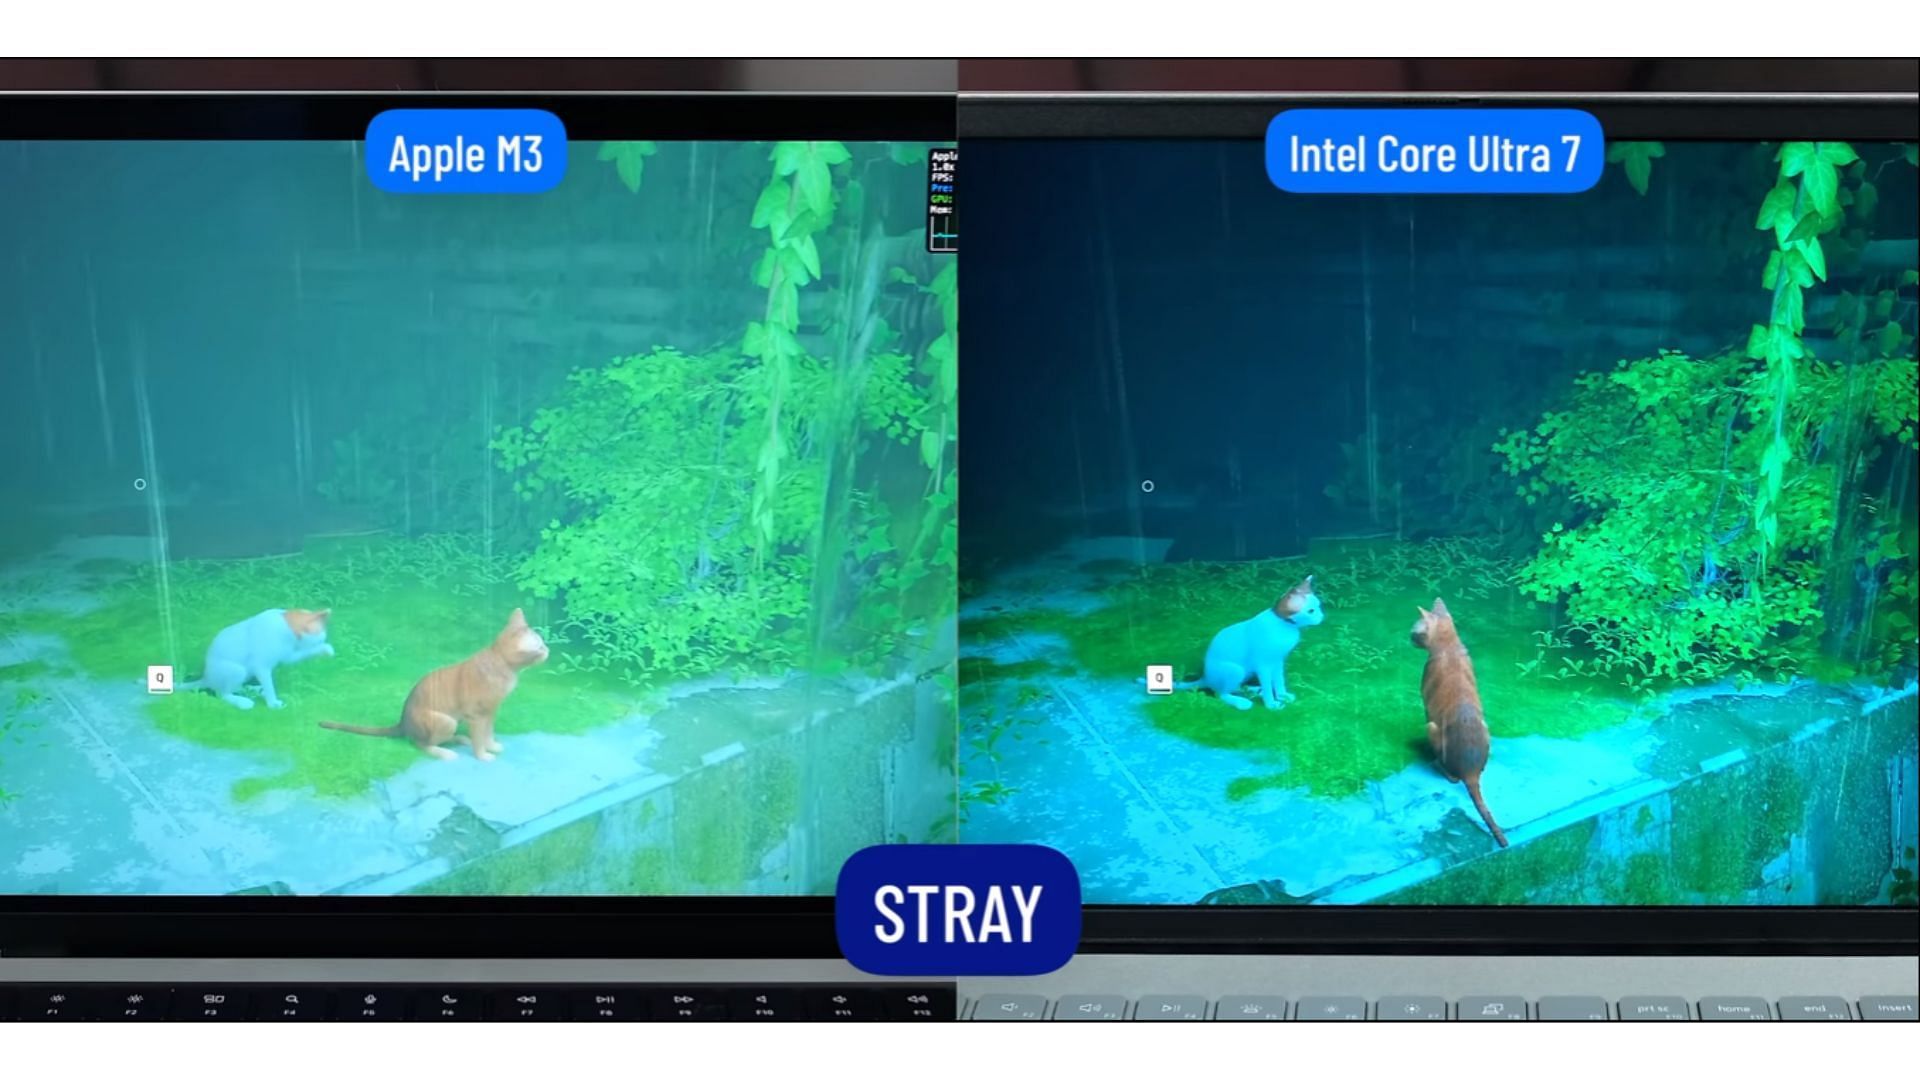 Though not the same chips in question, you can see Stray looks better on Intel chips (Image via YouTube/ThinkView)